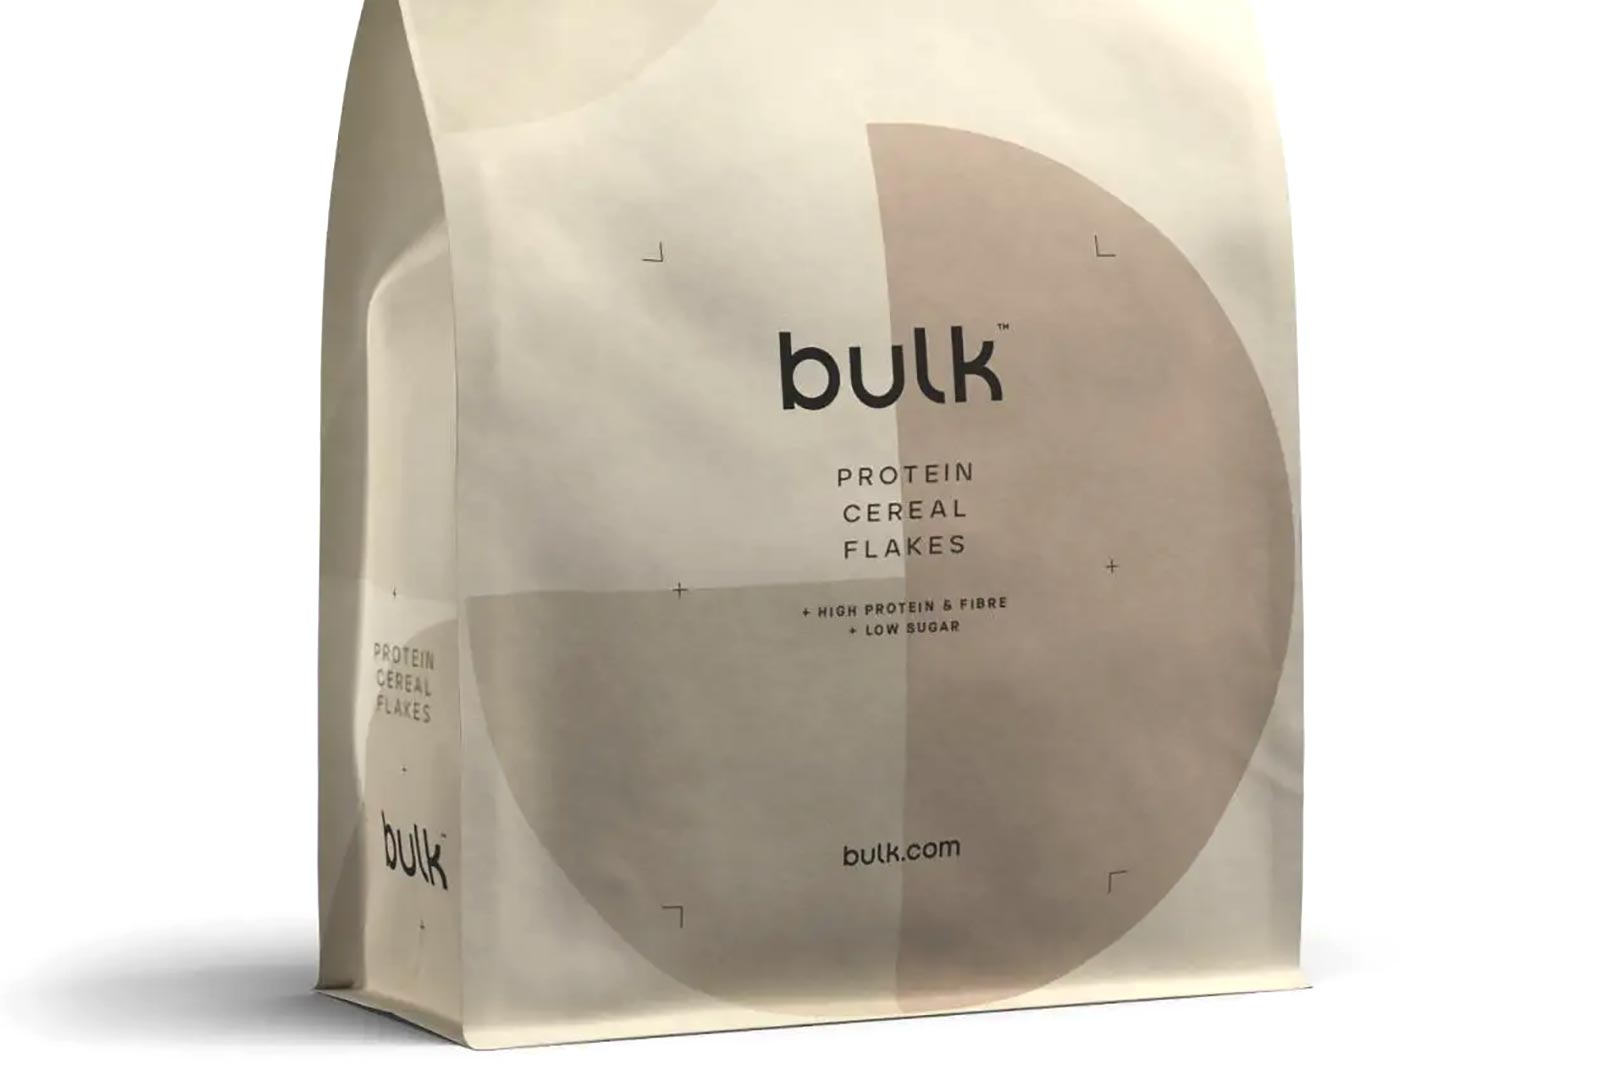 Bulk Protein Cereal Flakes